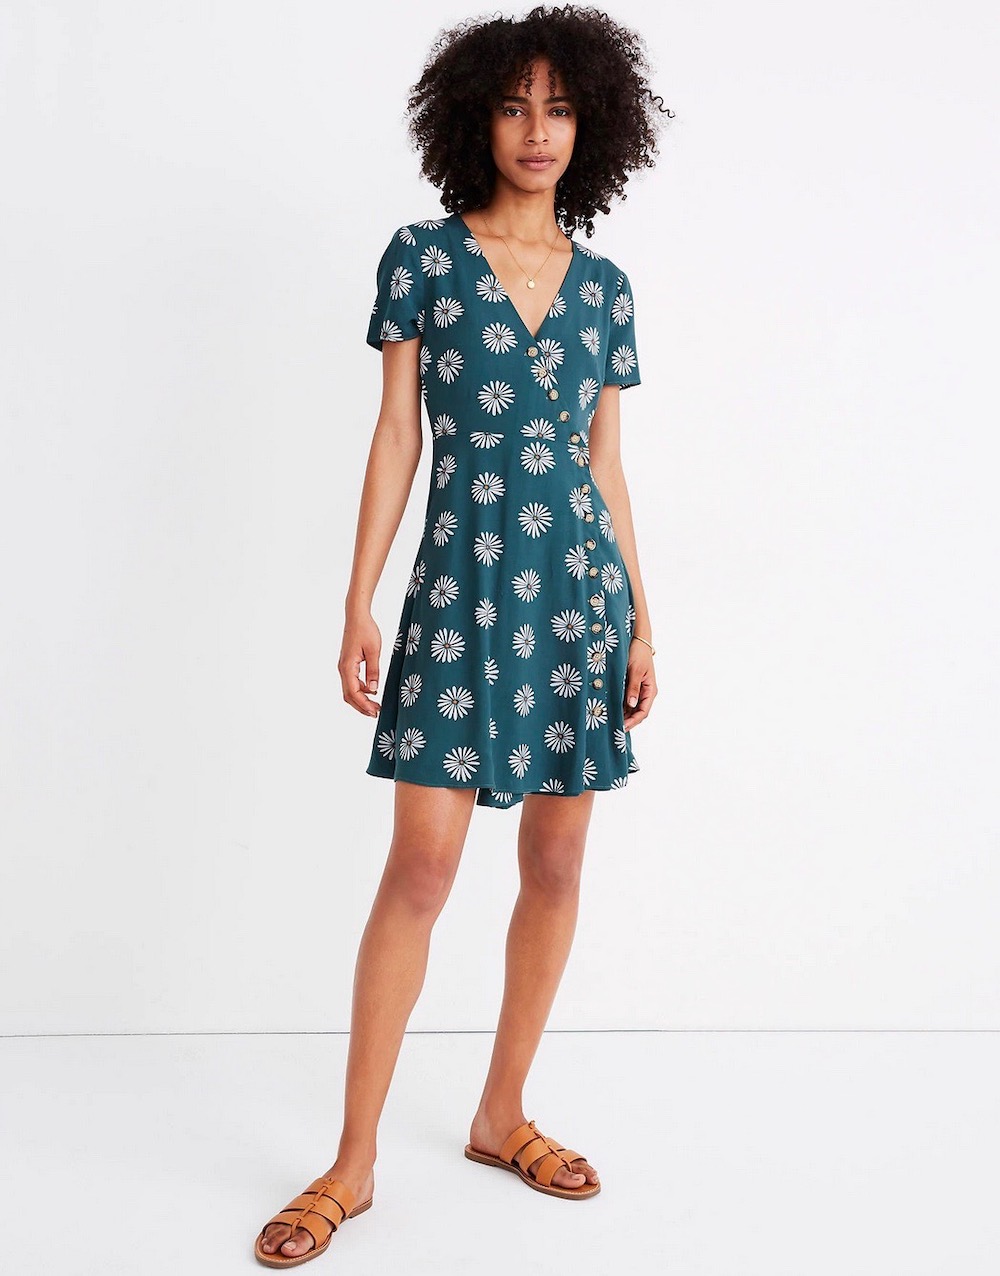 25 Cute Cheap Dresses for Spring Under $100 - theFashionSpot